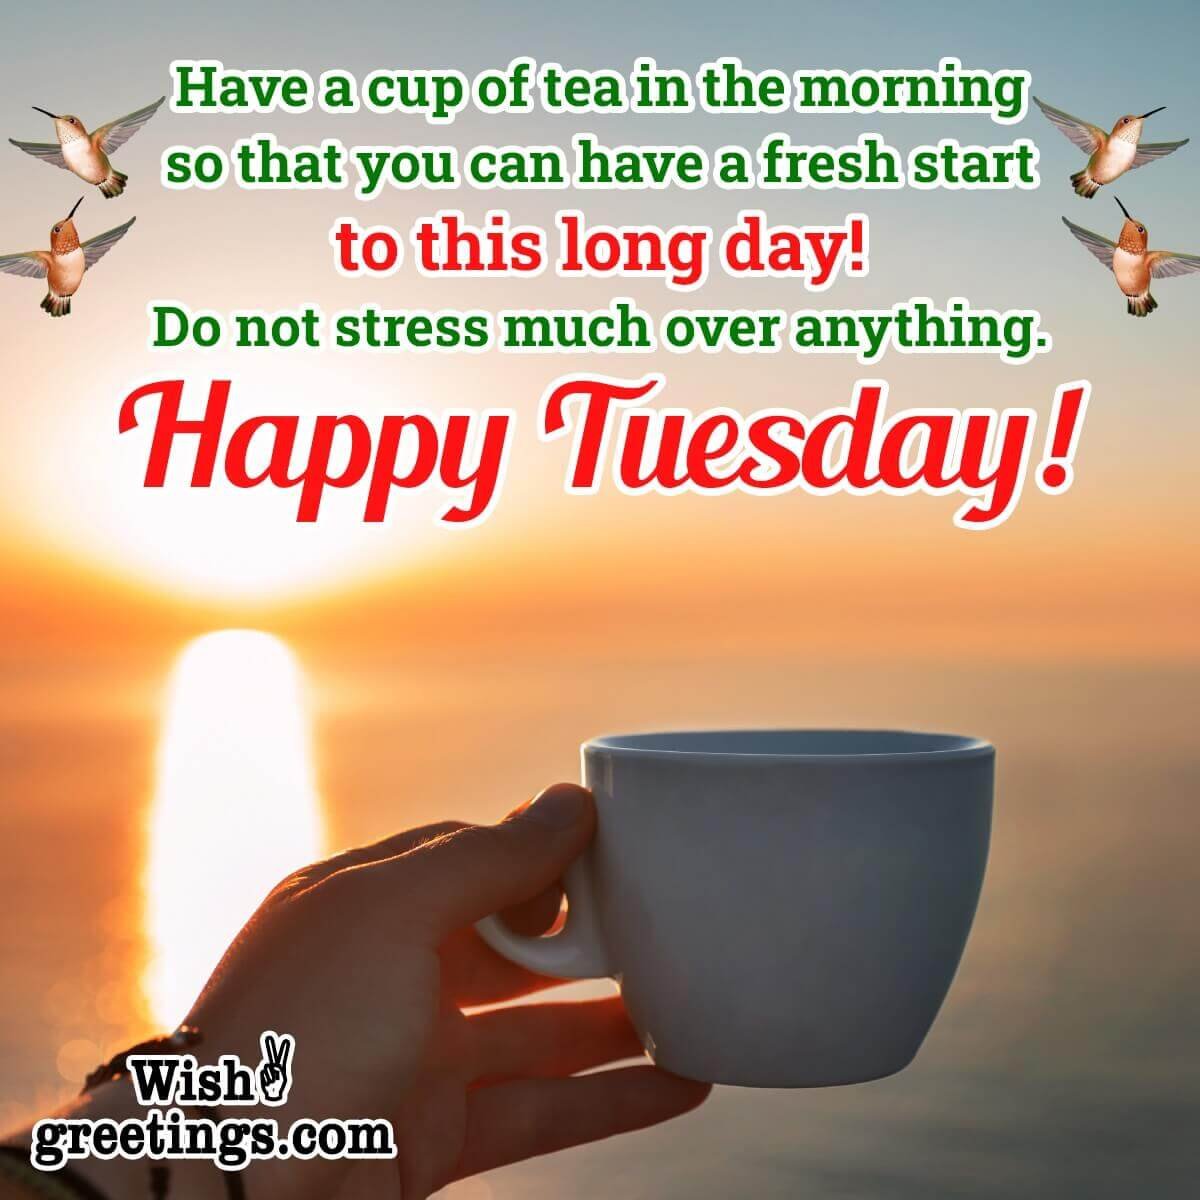 Tuesday Morning Wishes - Wish Greetings